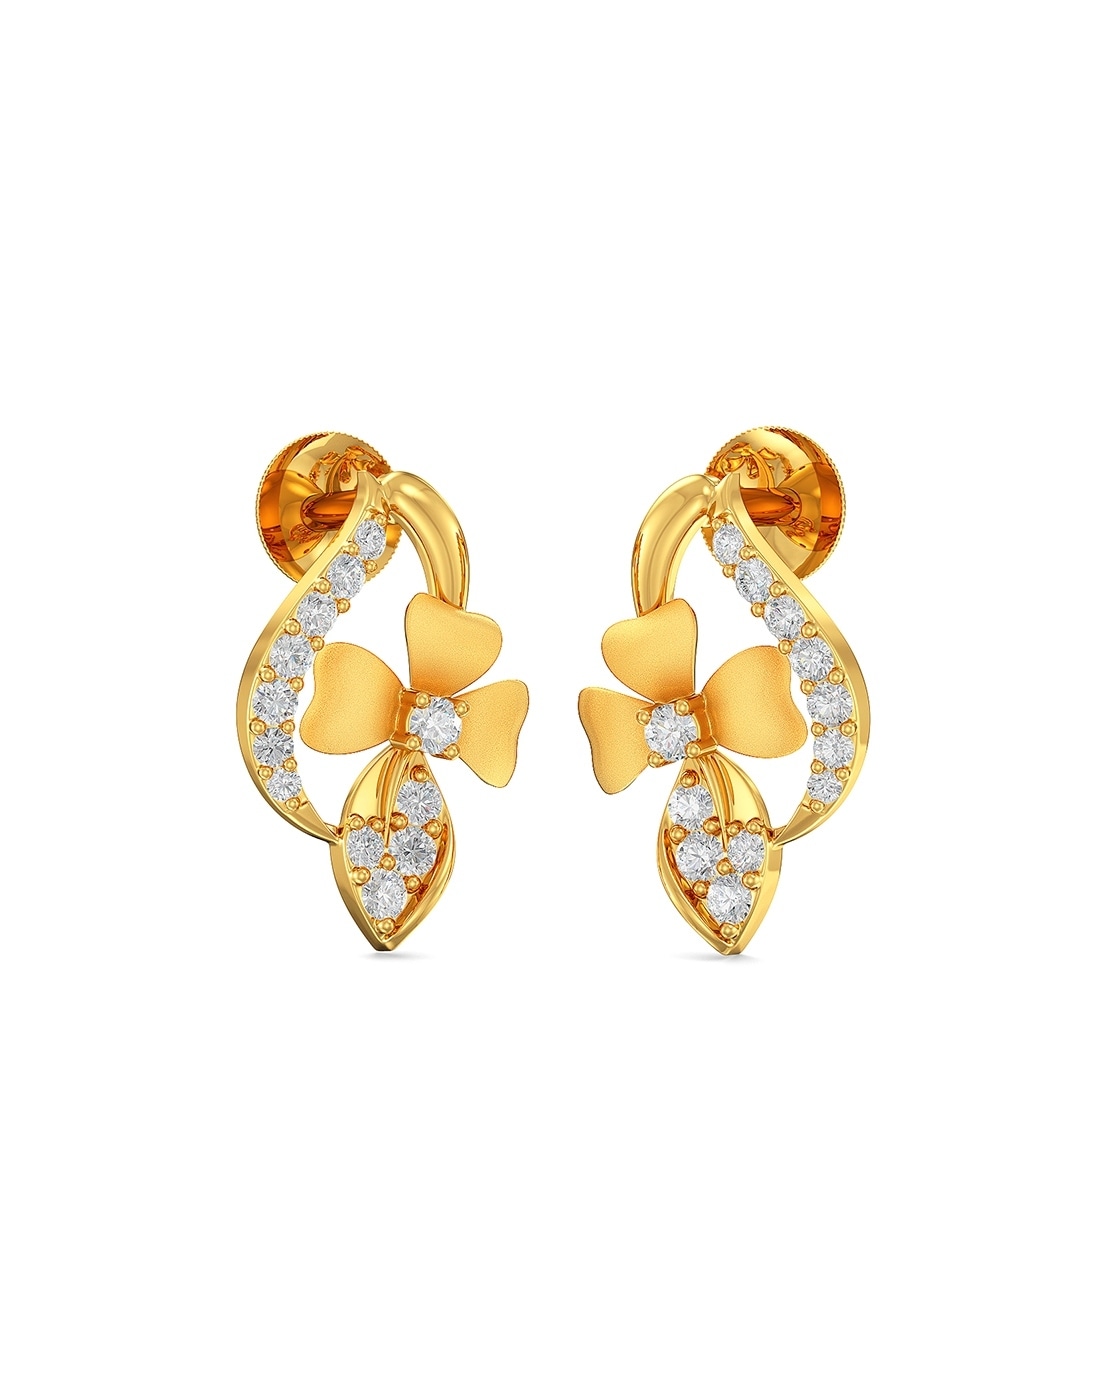 Latest 2 Gram Gold Earrings With Price 2023 || Gold Ear Tops Design -  YouTube